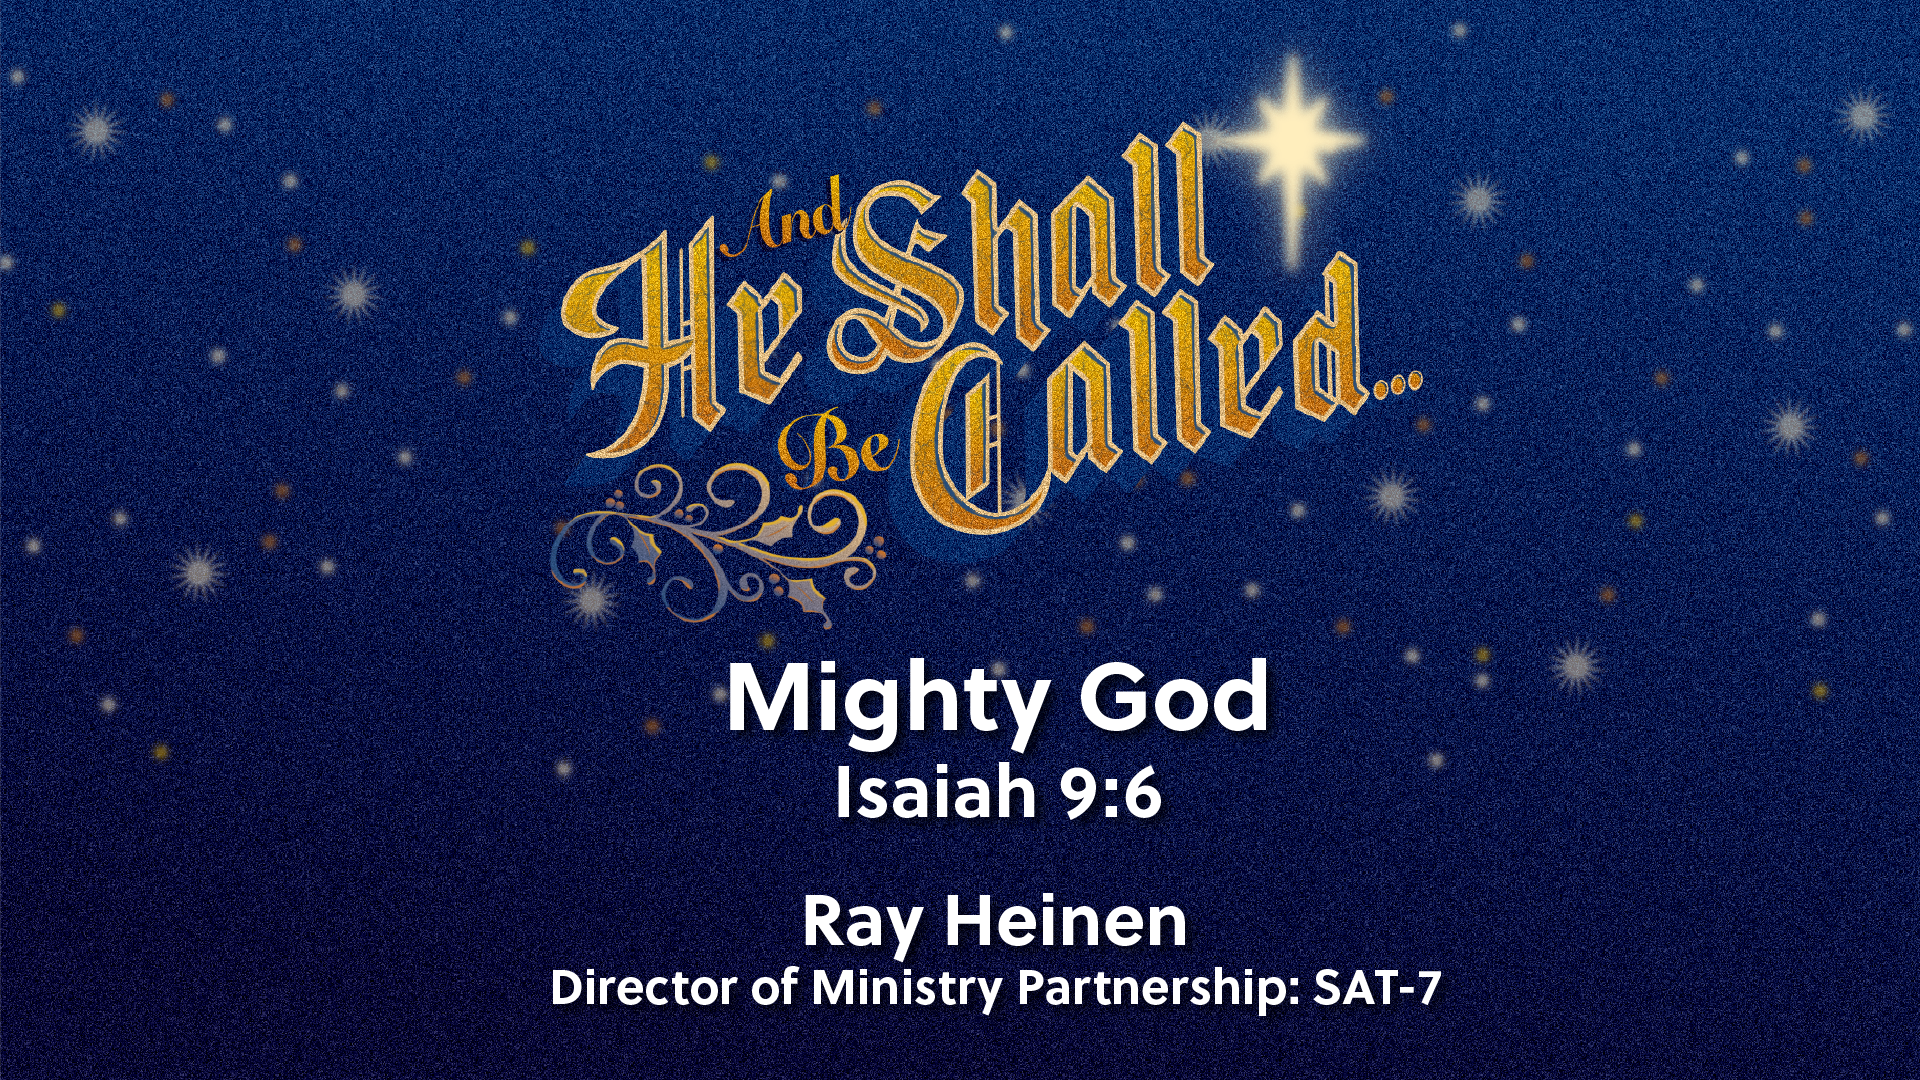 Featured image for “And He Shall Be Called Mighty God”